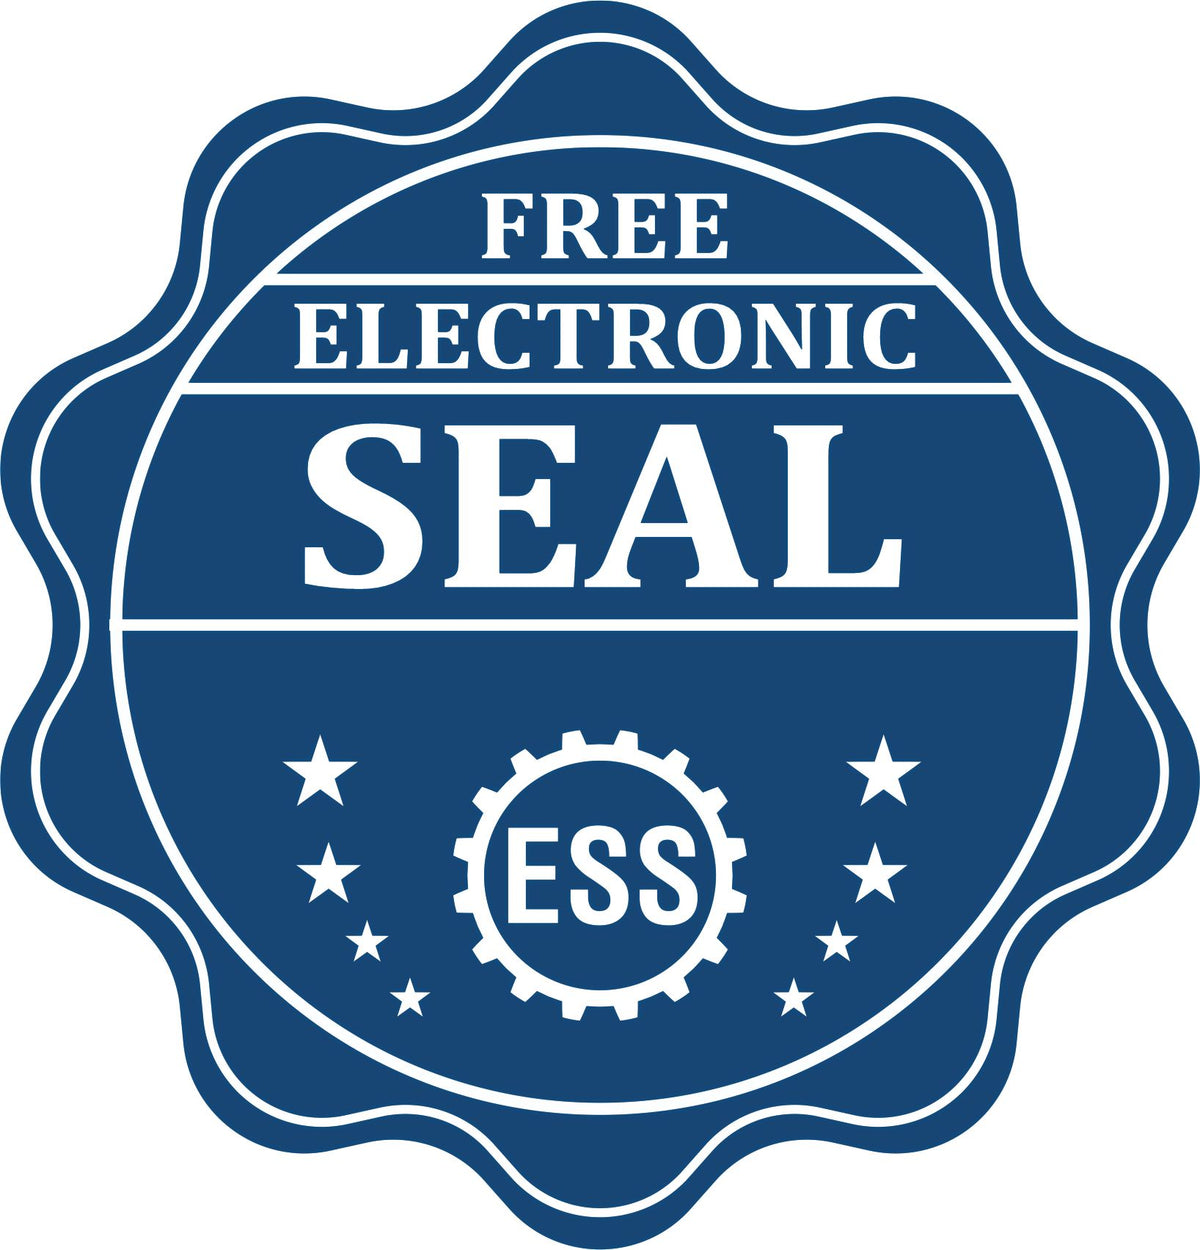 A badge showing a free electronic seal for the Hybrid Guam Landscape Architect Seal with stars and the ESS gear on the emblem.